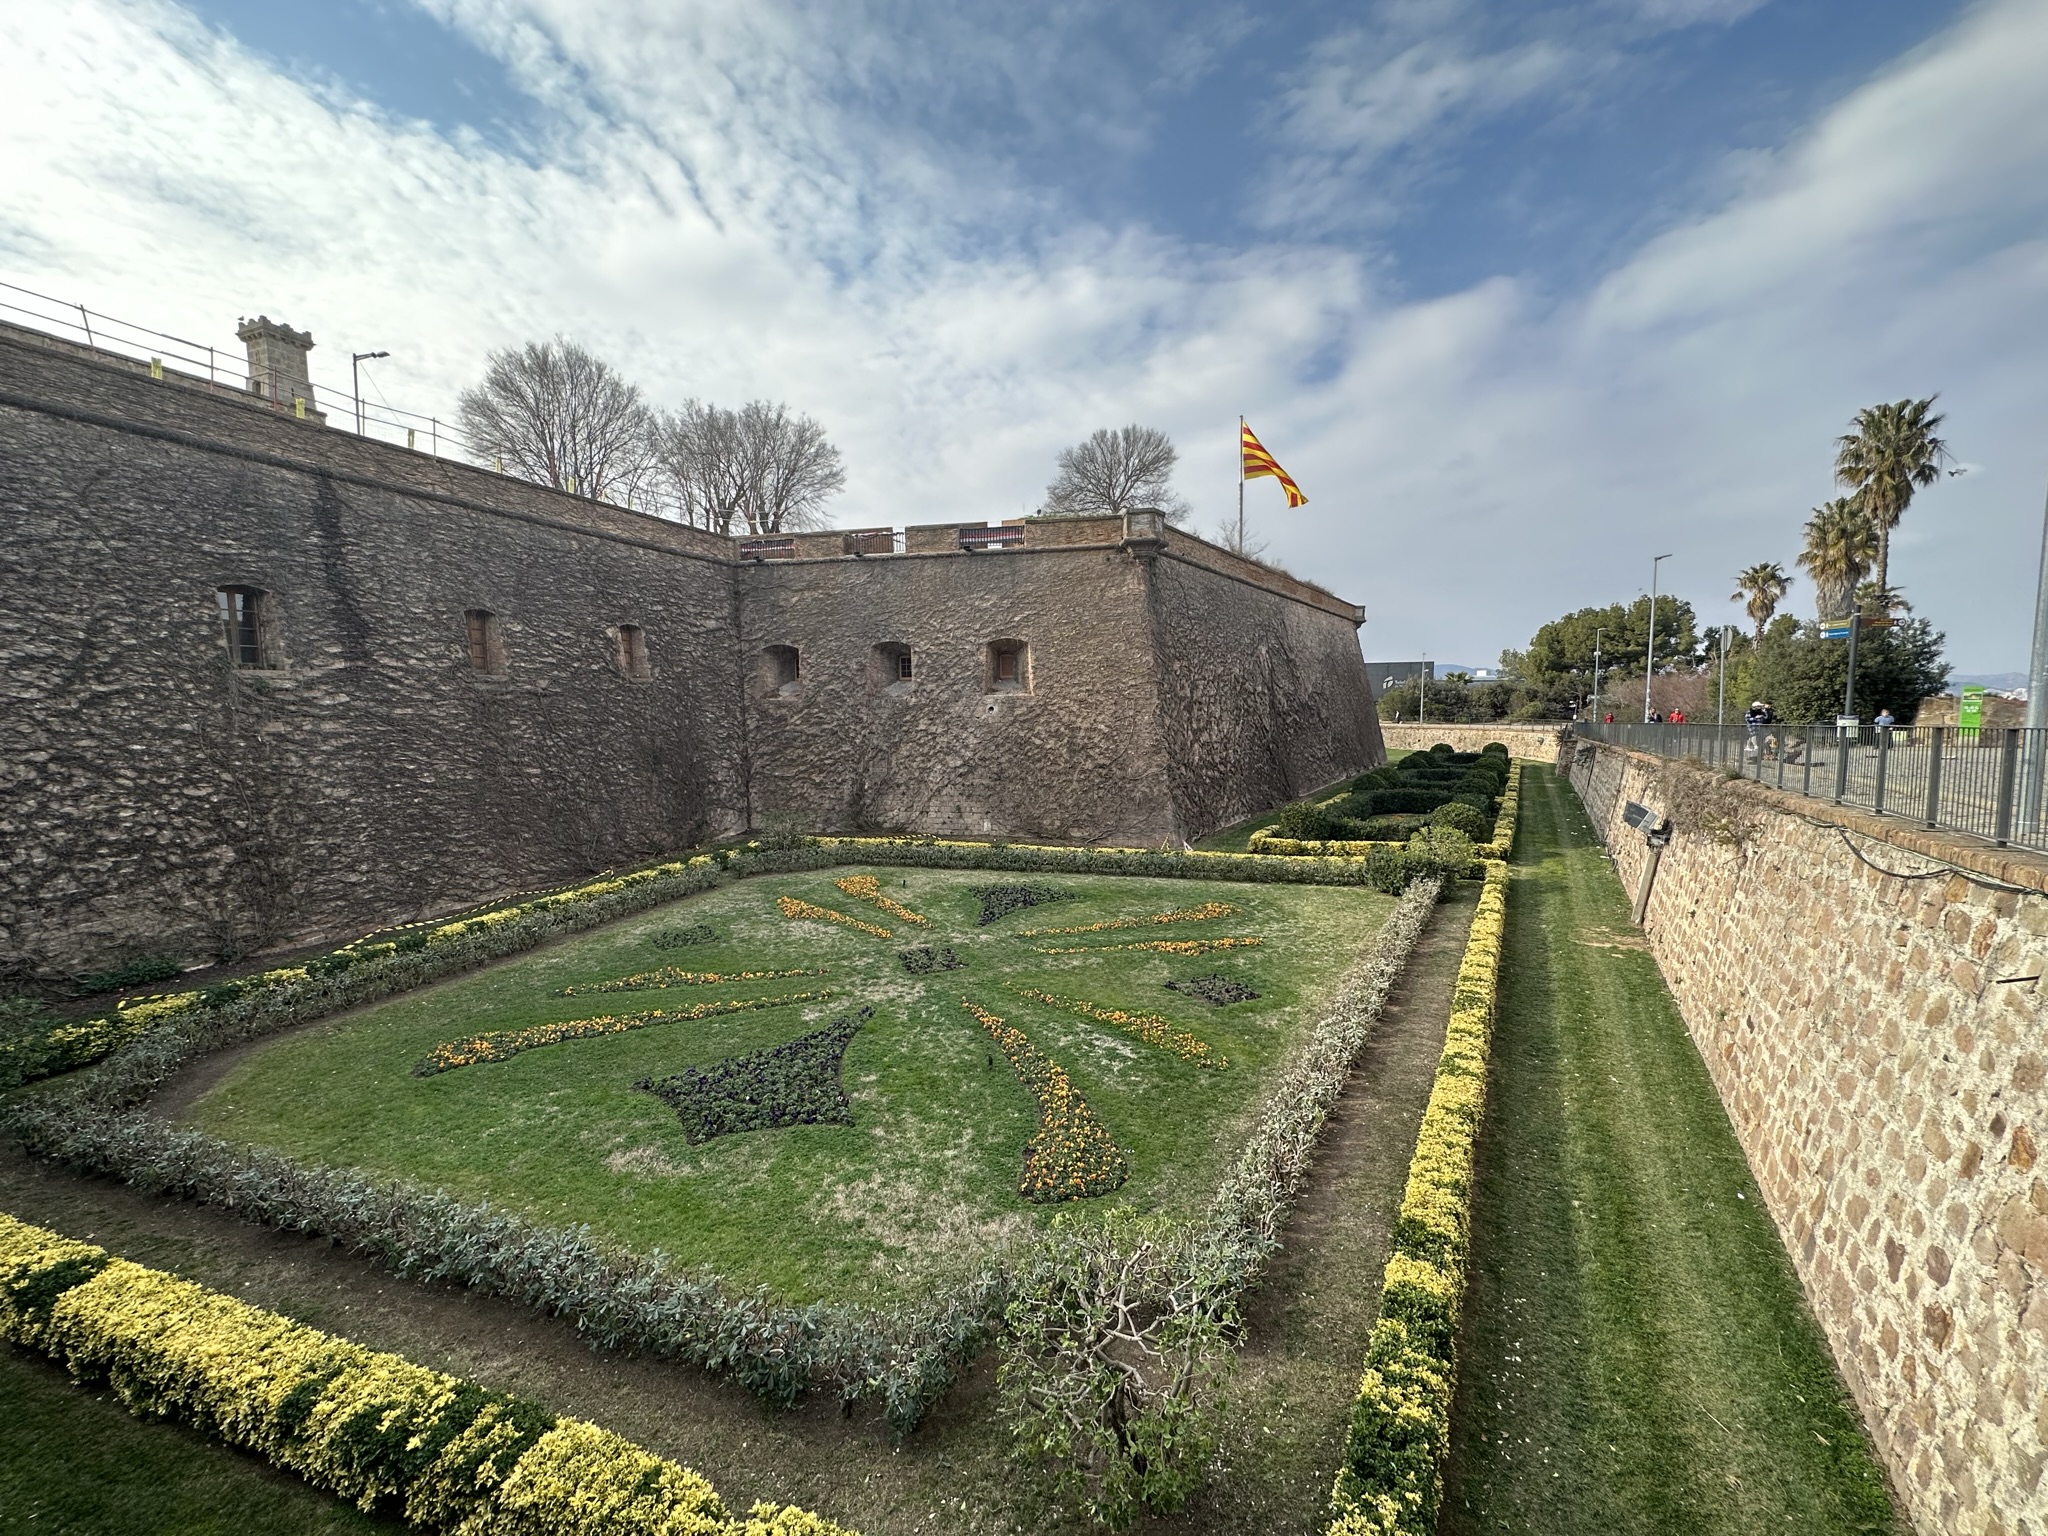 Montjuic Castle - a military castle overseeing both the city and the see